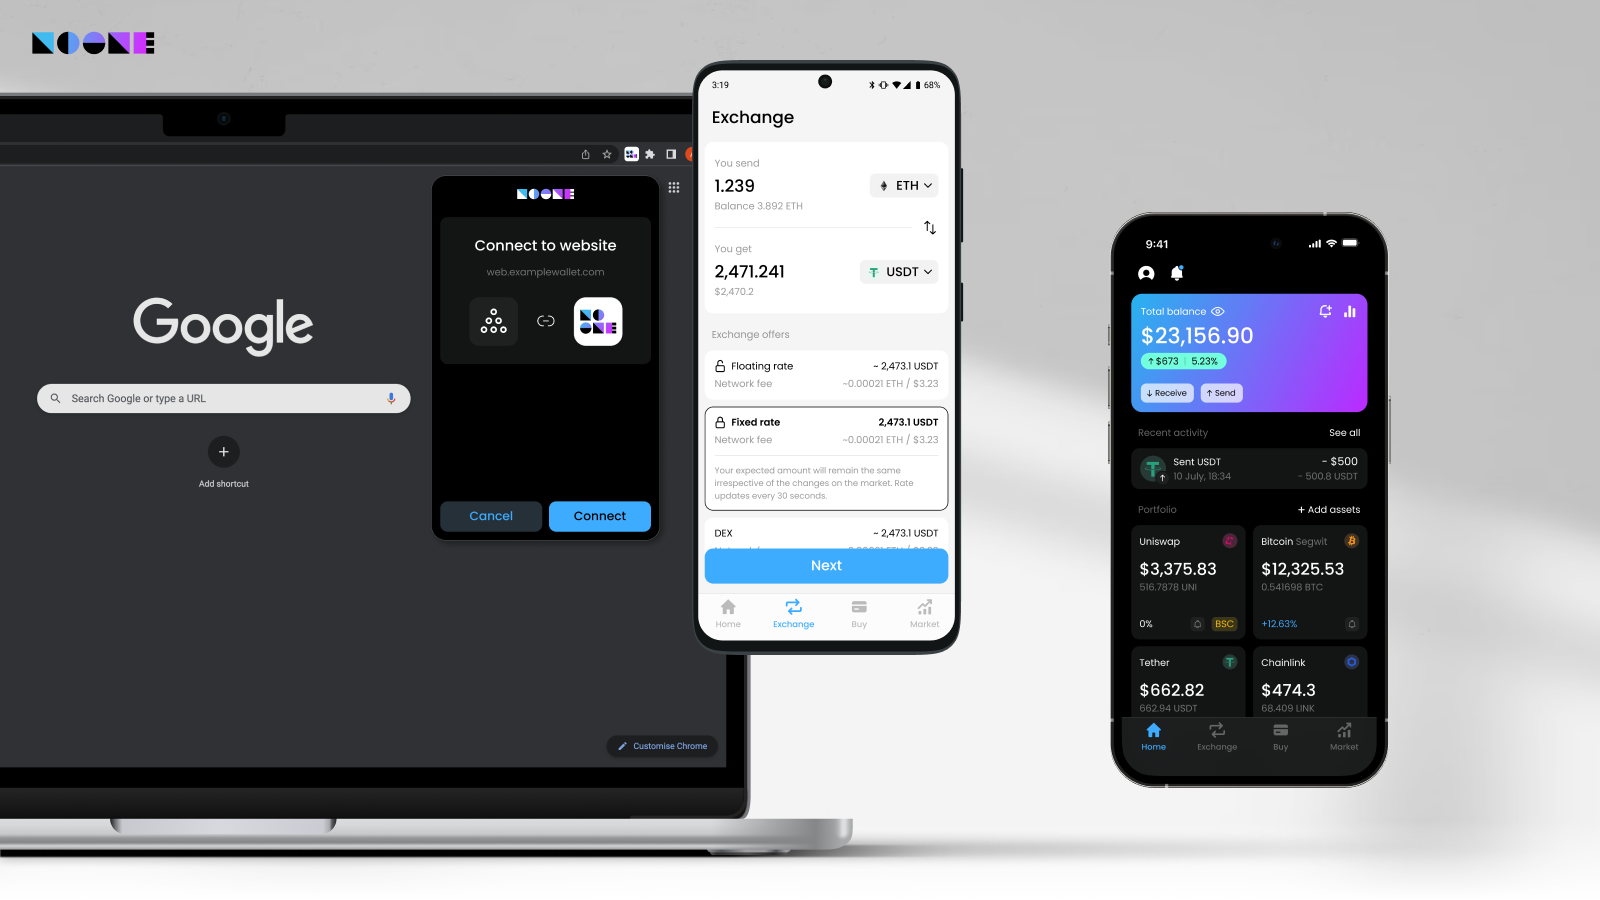 Noone Wallet's interface on mobile and web.